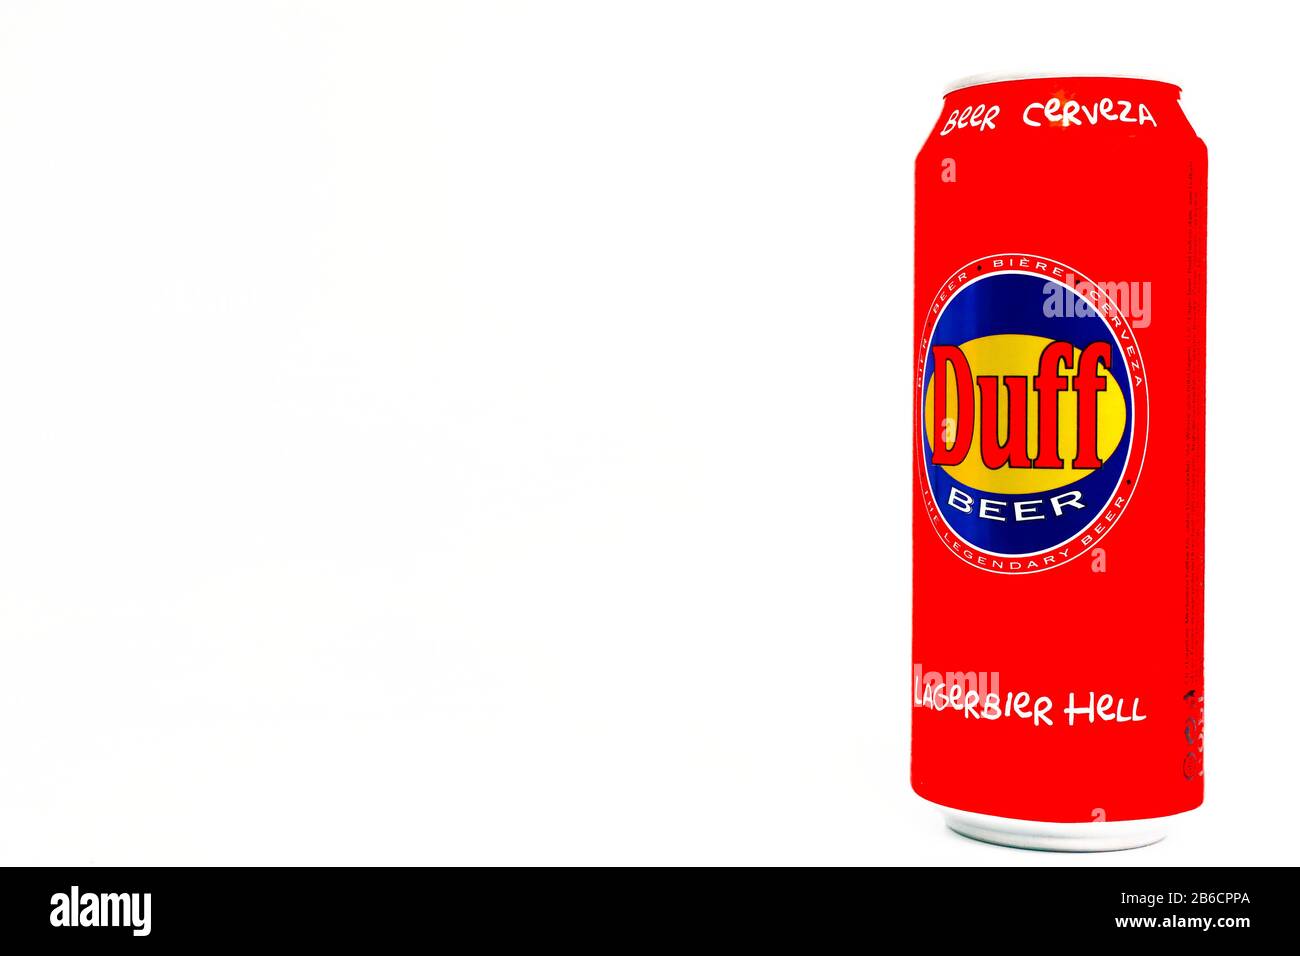 DUFF Beer, the legendary beer produced by Duff beverage GmbH Stock Photo